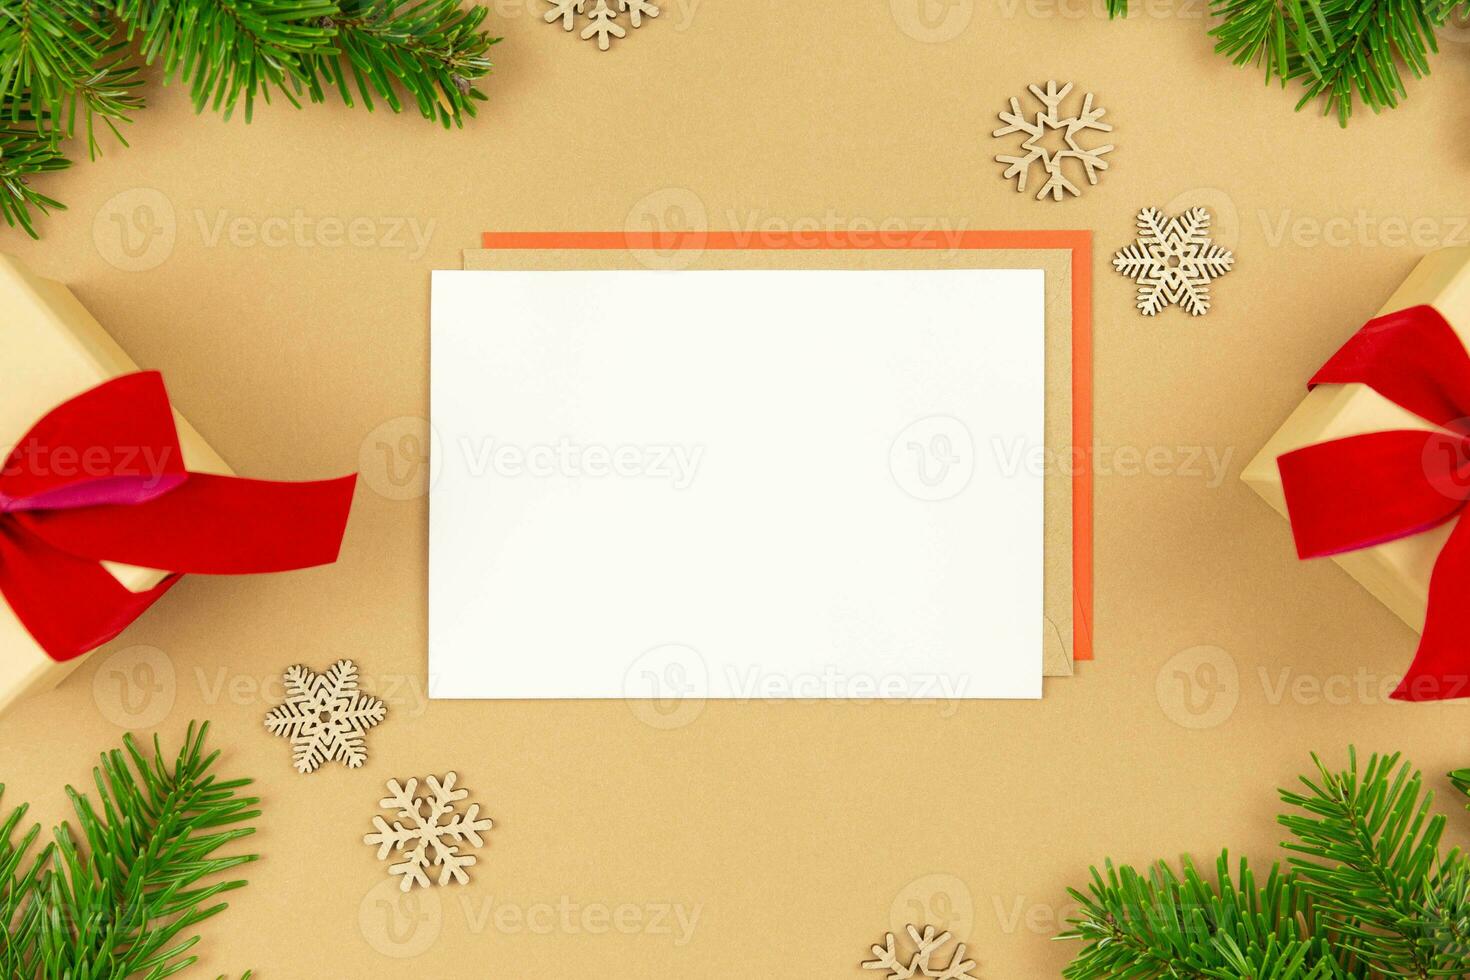 Christmas greeting card mockup and wrapped gift boxes with red ribbon and christmas tree branches decoration on paper background. Festive flat lay styled template composition. Top view. photo